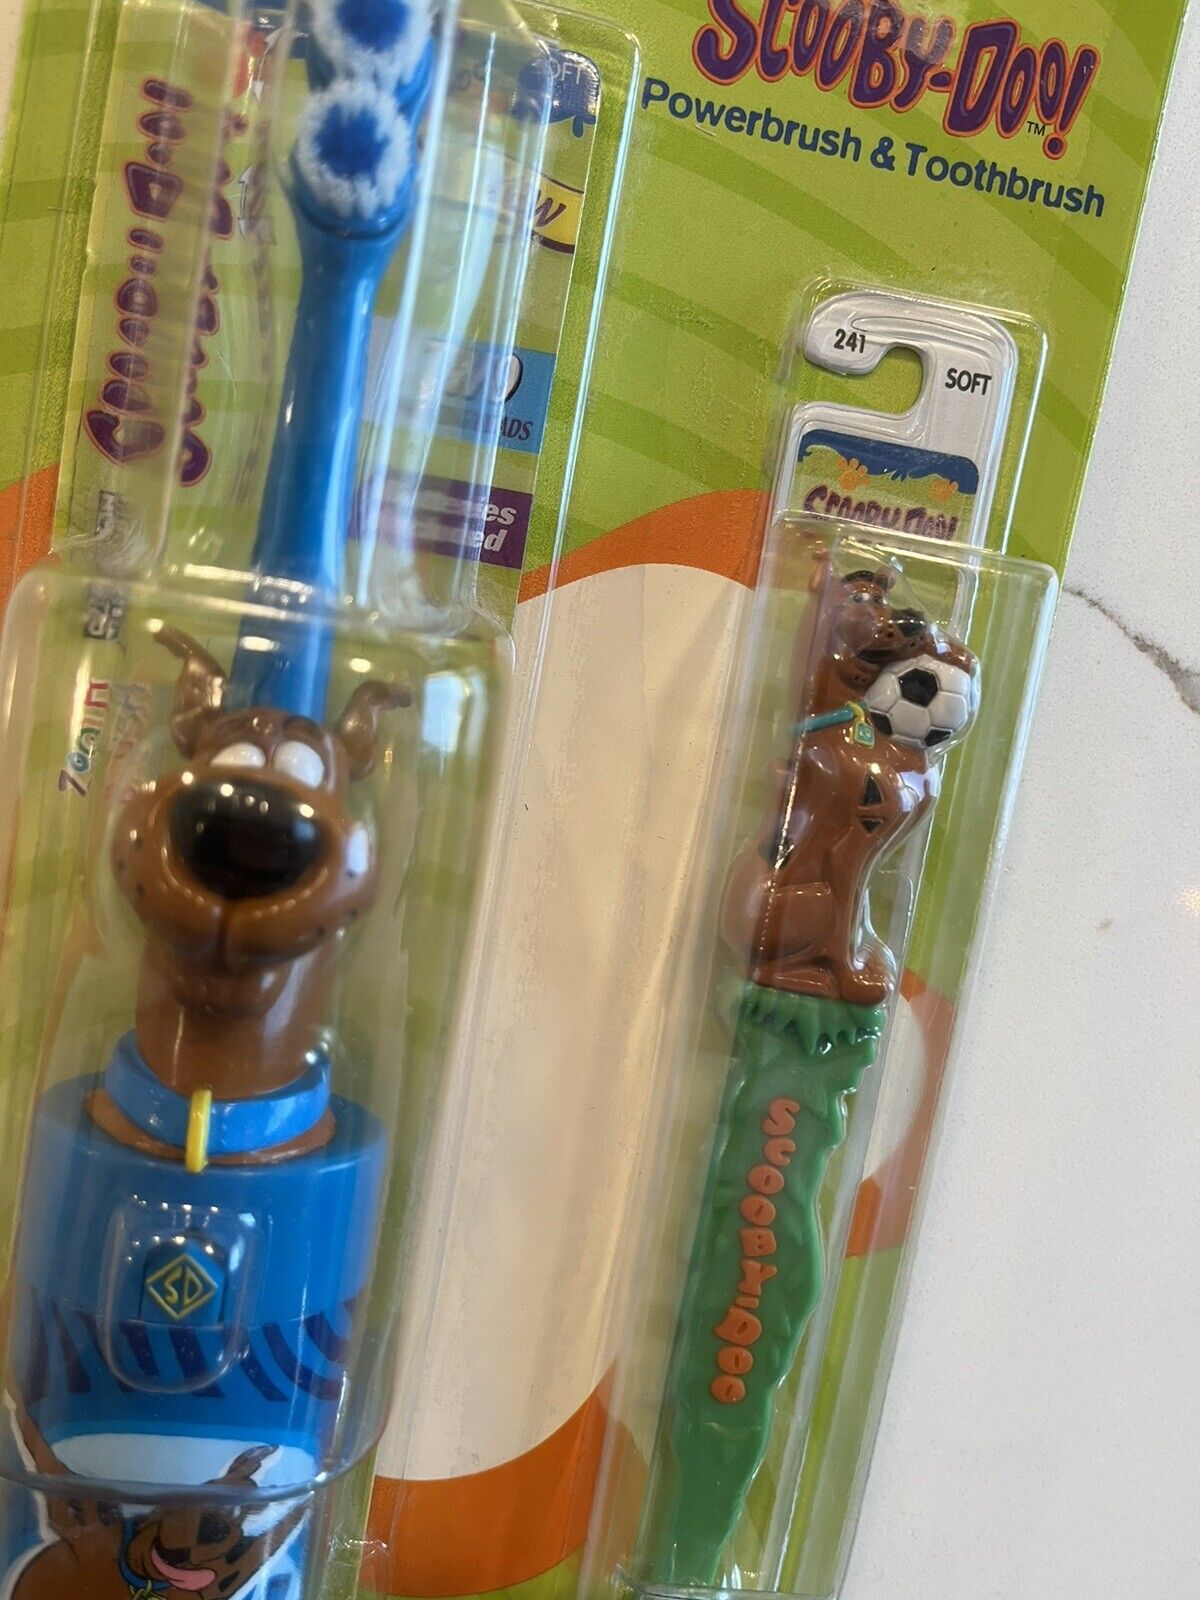 RARE Vintage Scooby-Doo Cartoon Network Toothbrush & Electric Brush Combo SEALED